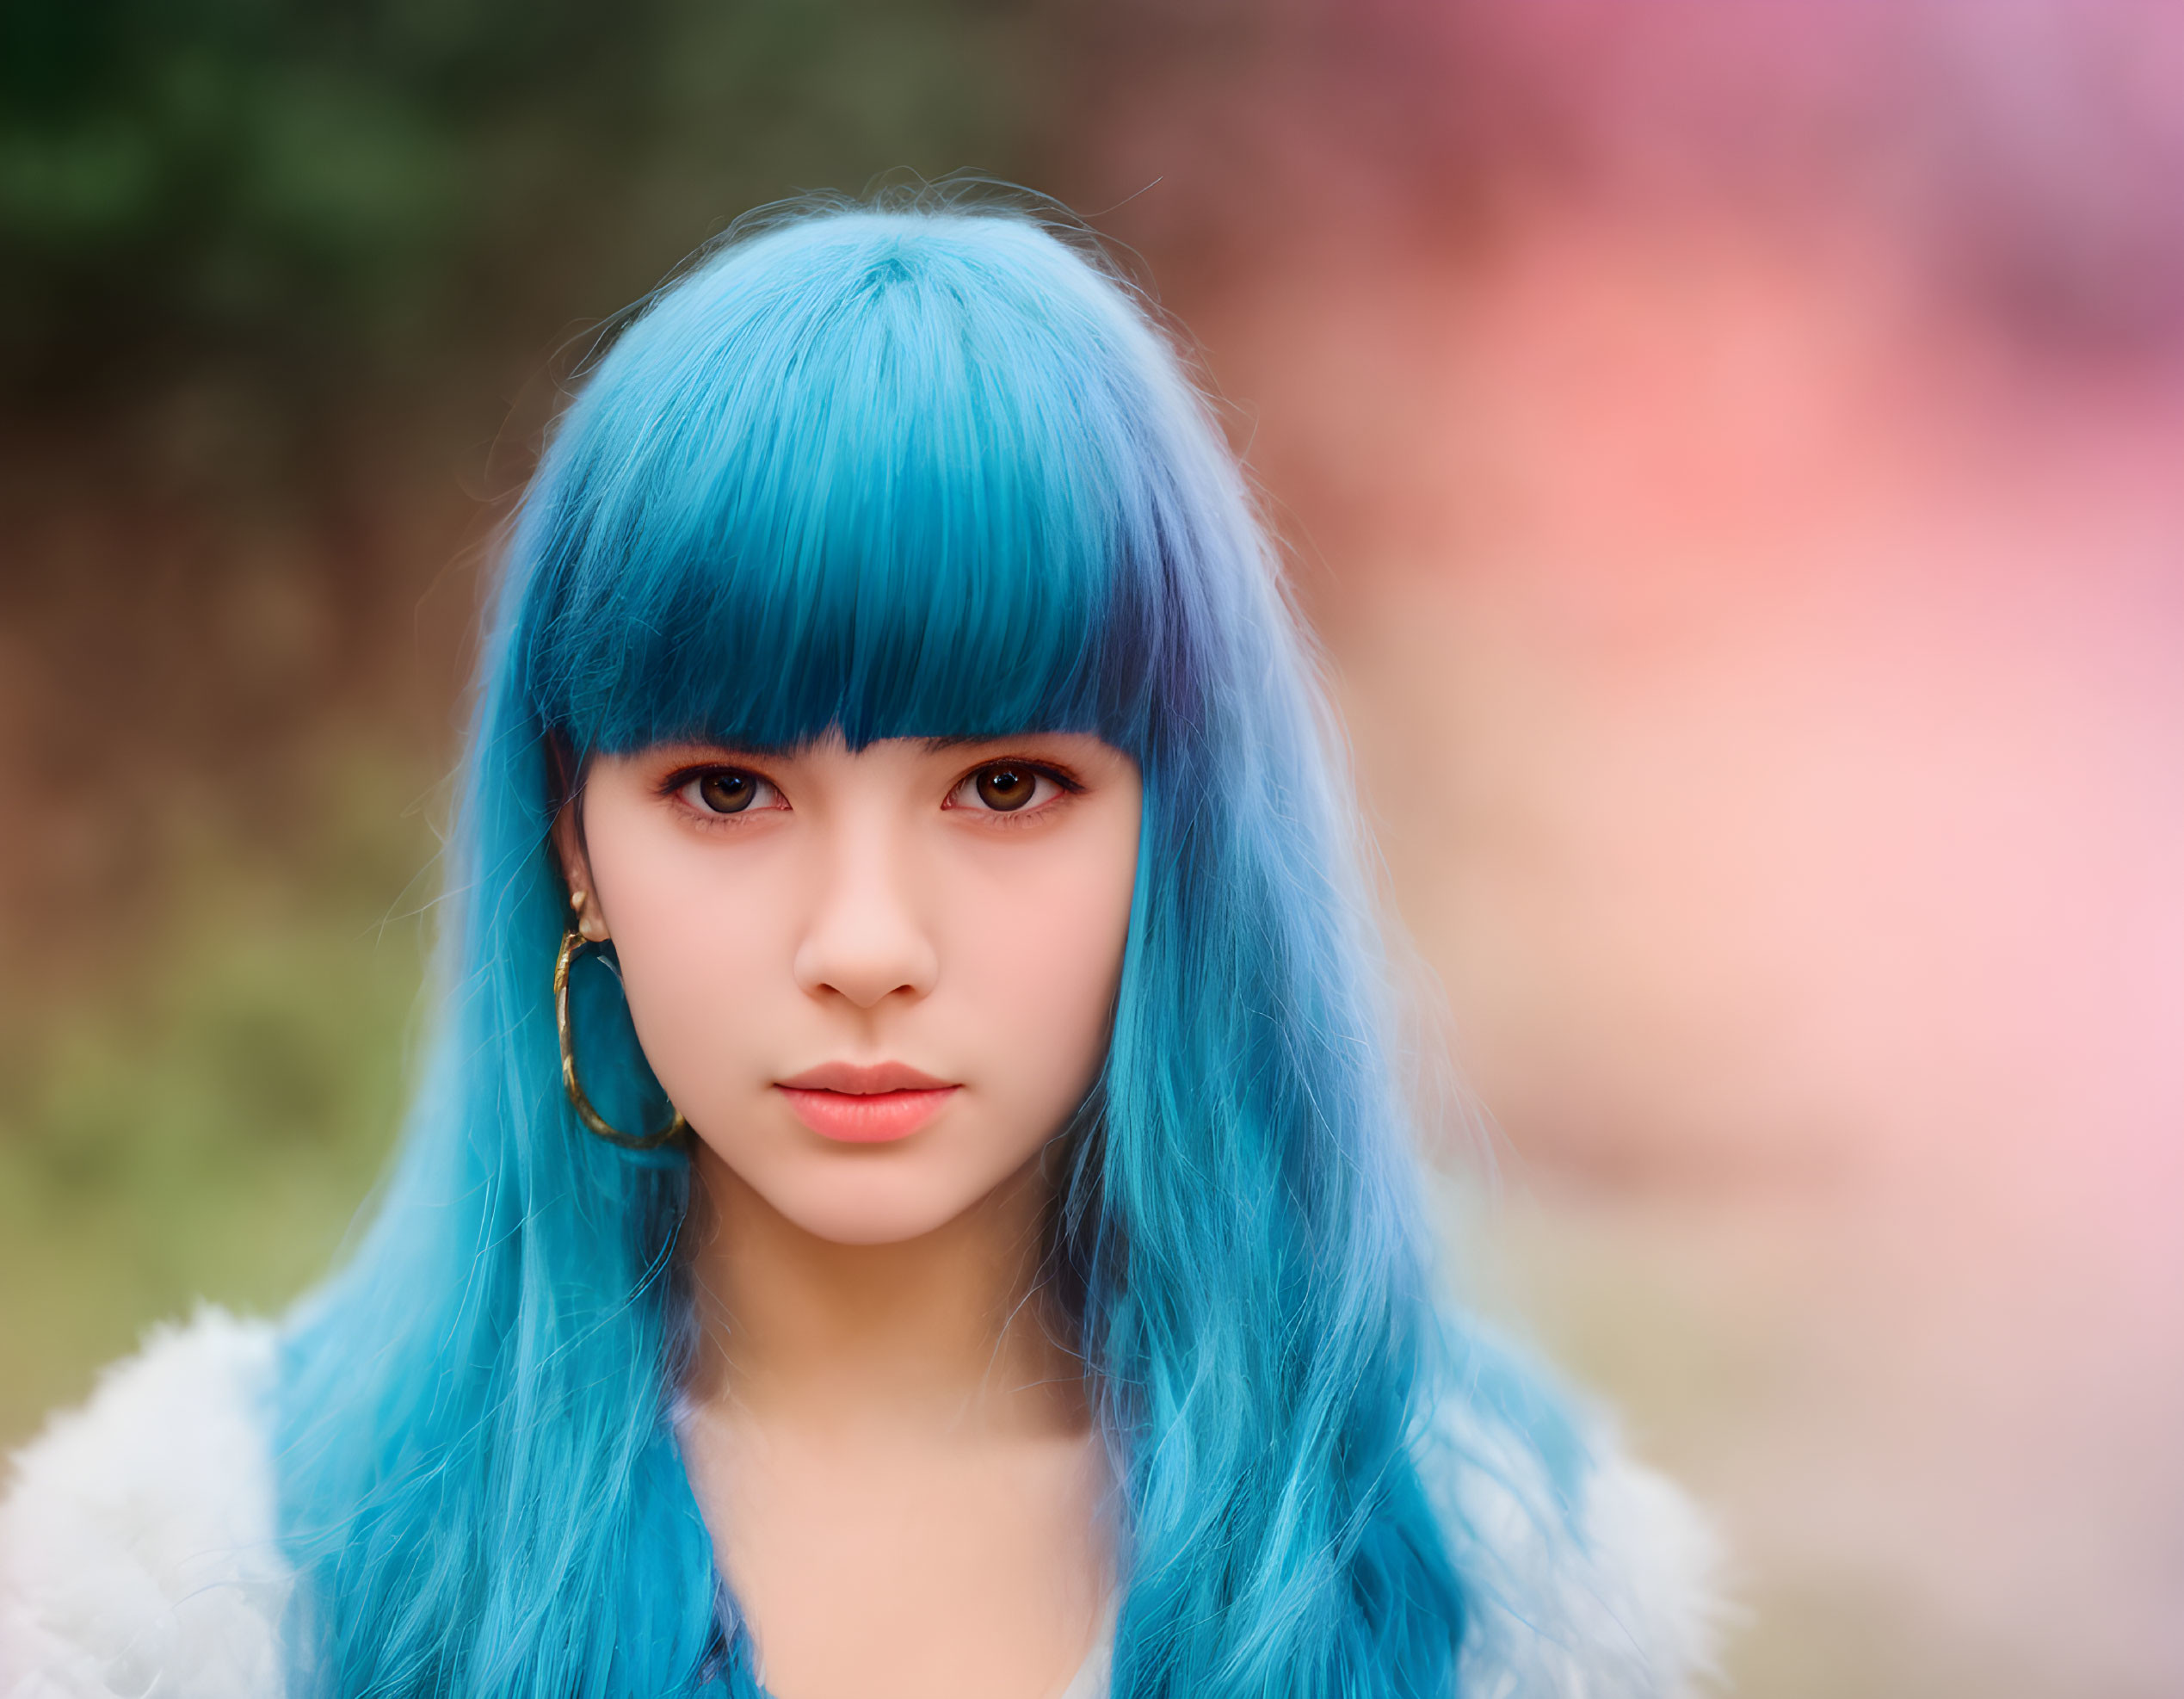 Vibrant blue-haired woman portrait with hoop earring on colorful backdrop